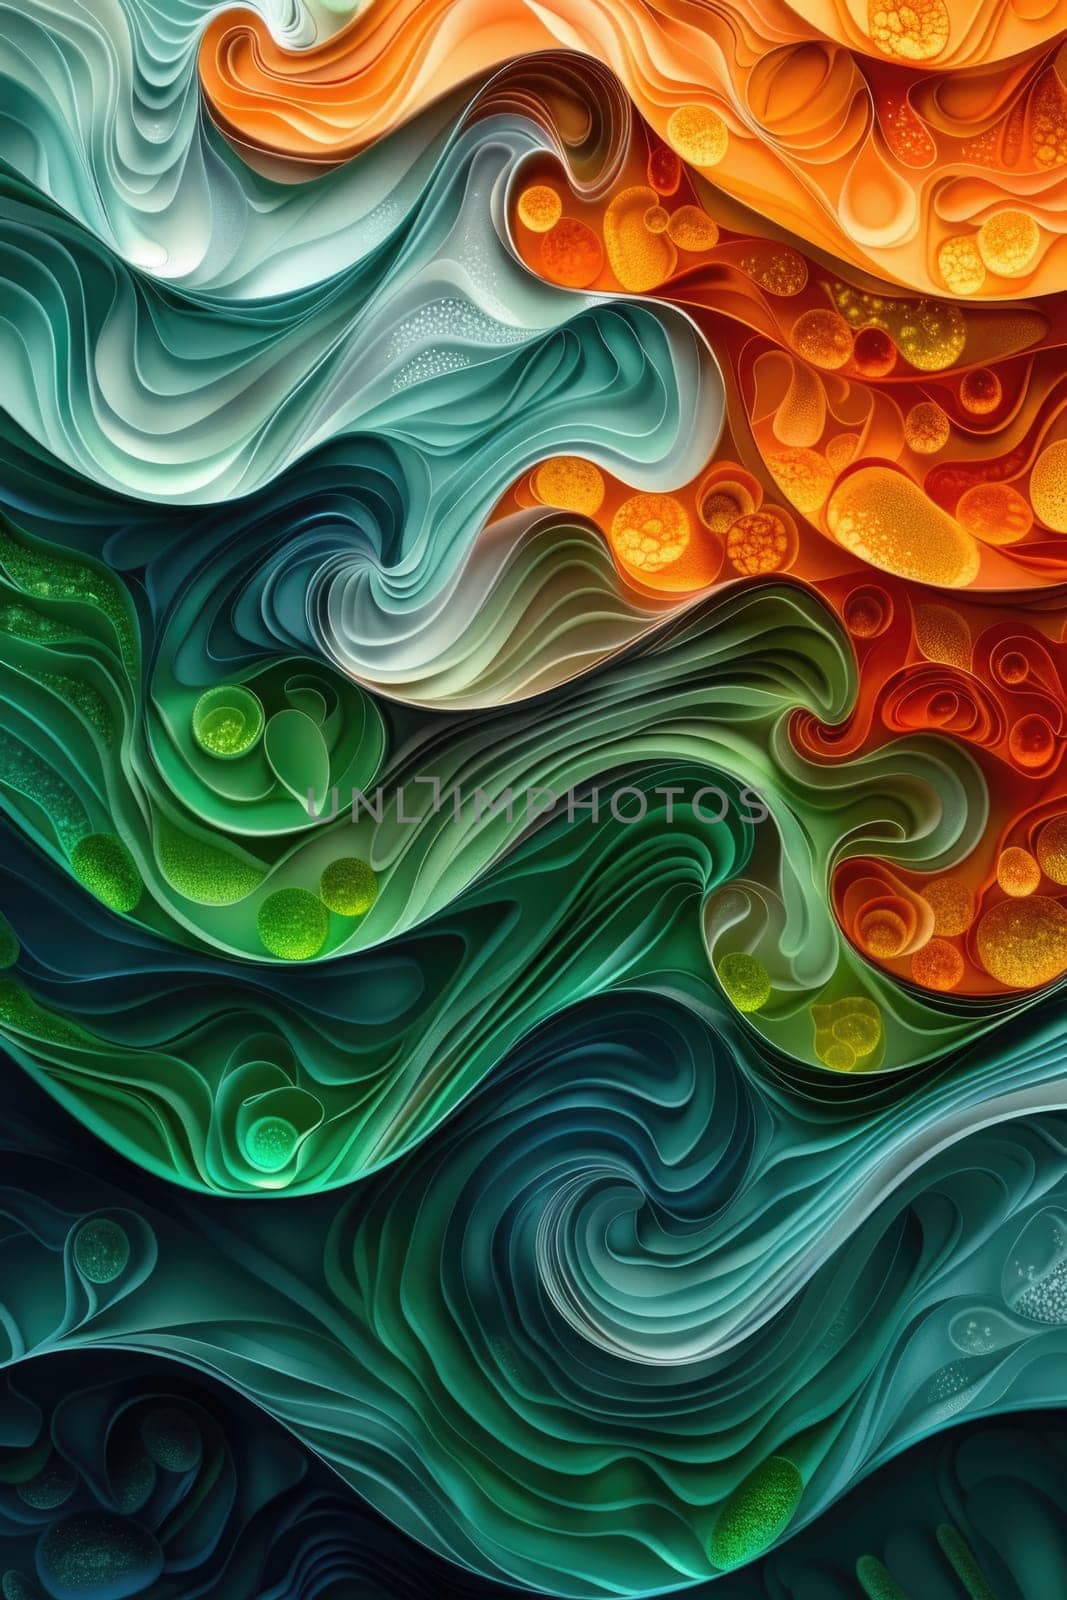 Vibrant Wave Painting in Orange and Green by but_photo